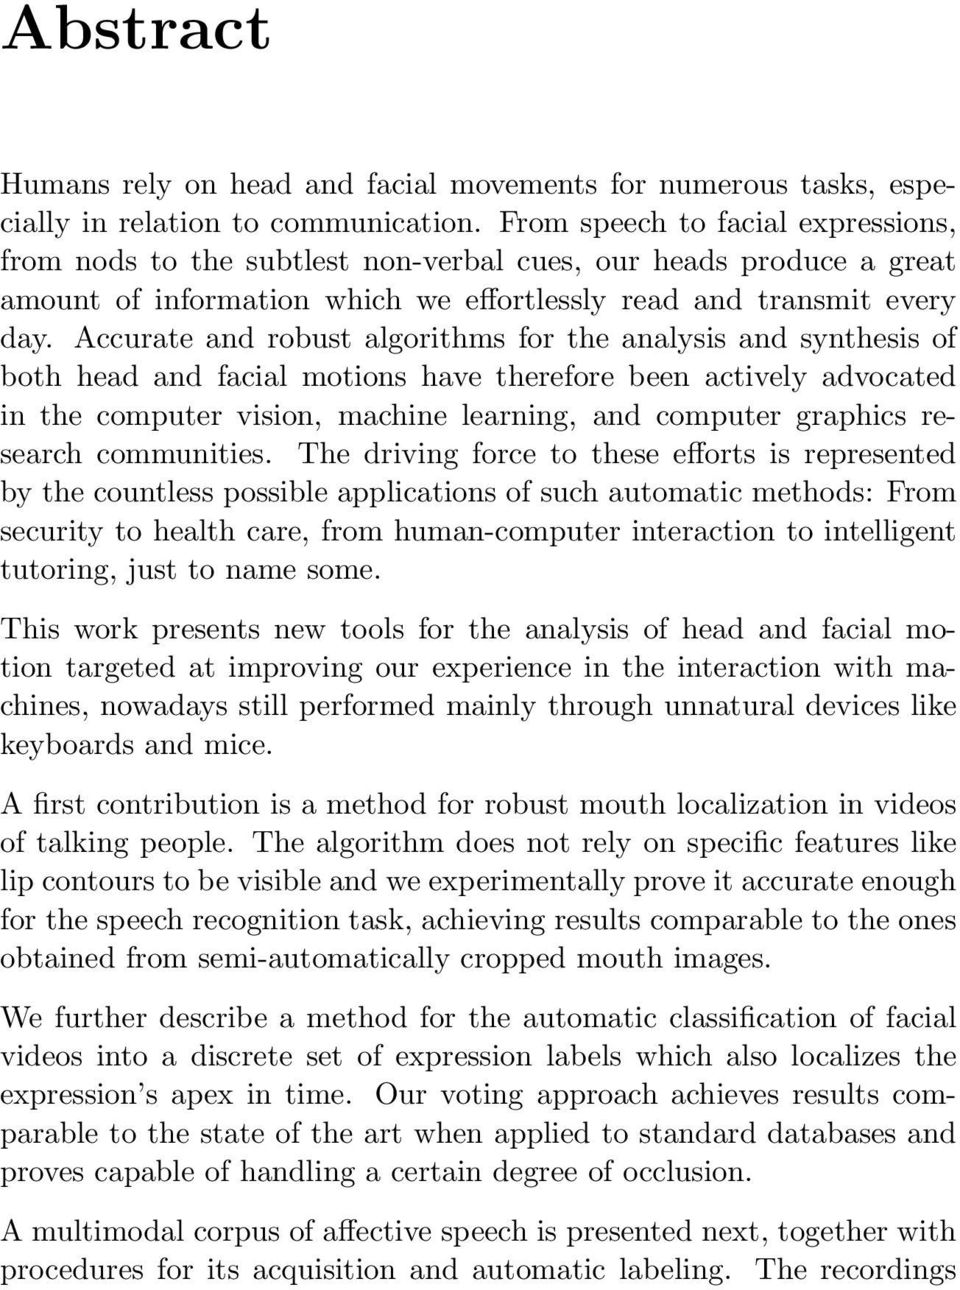 Accurate and robust algorithms for the analysis and synthesis of both head and facial motions have therefore been actively advocated in the computer vision, machine learning, and computer graphics